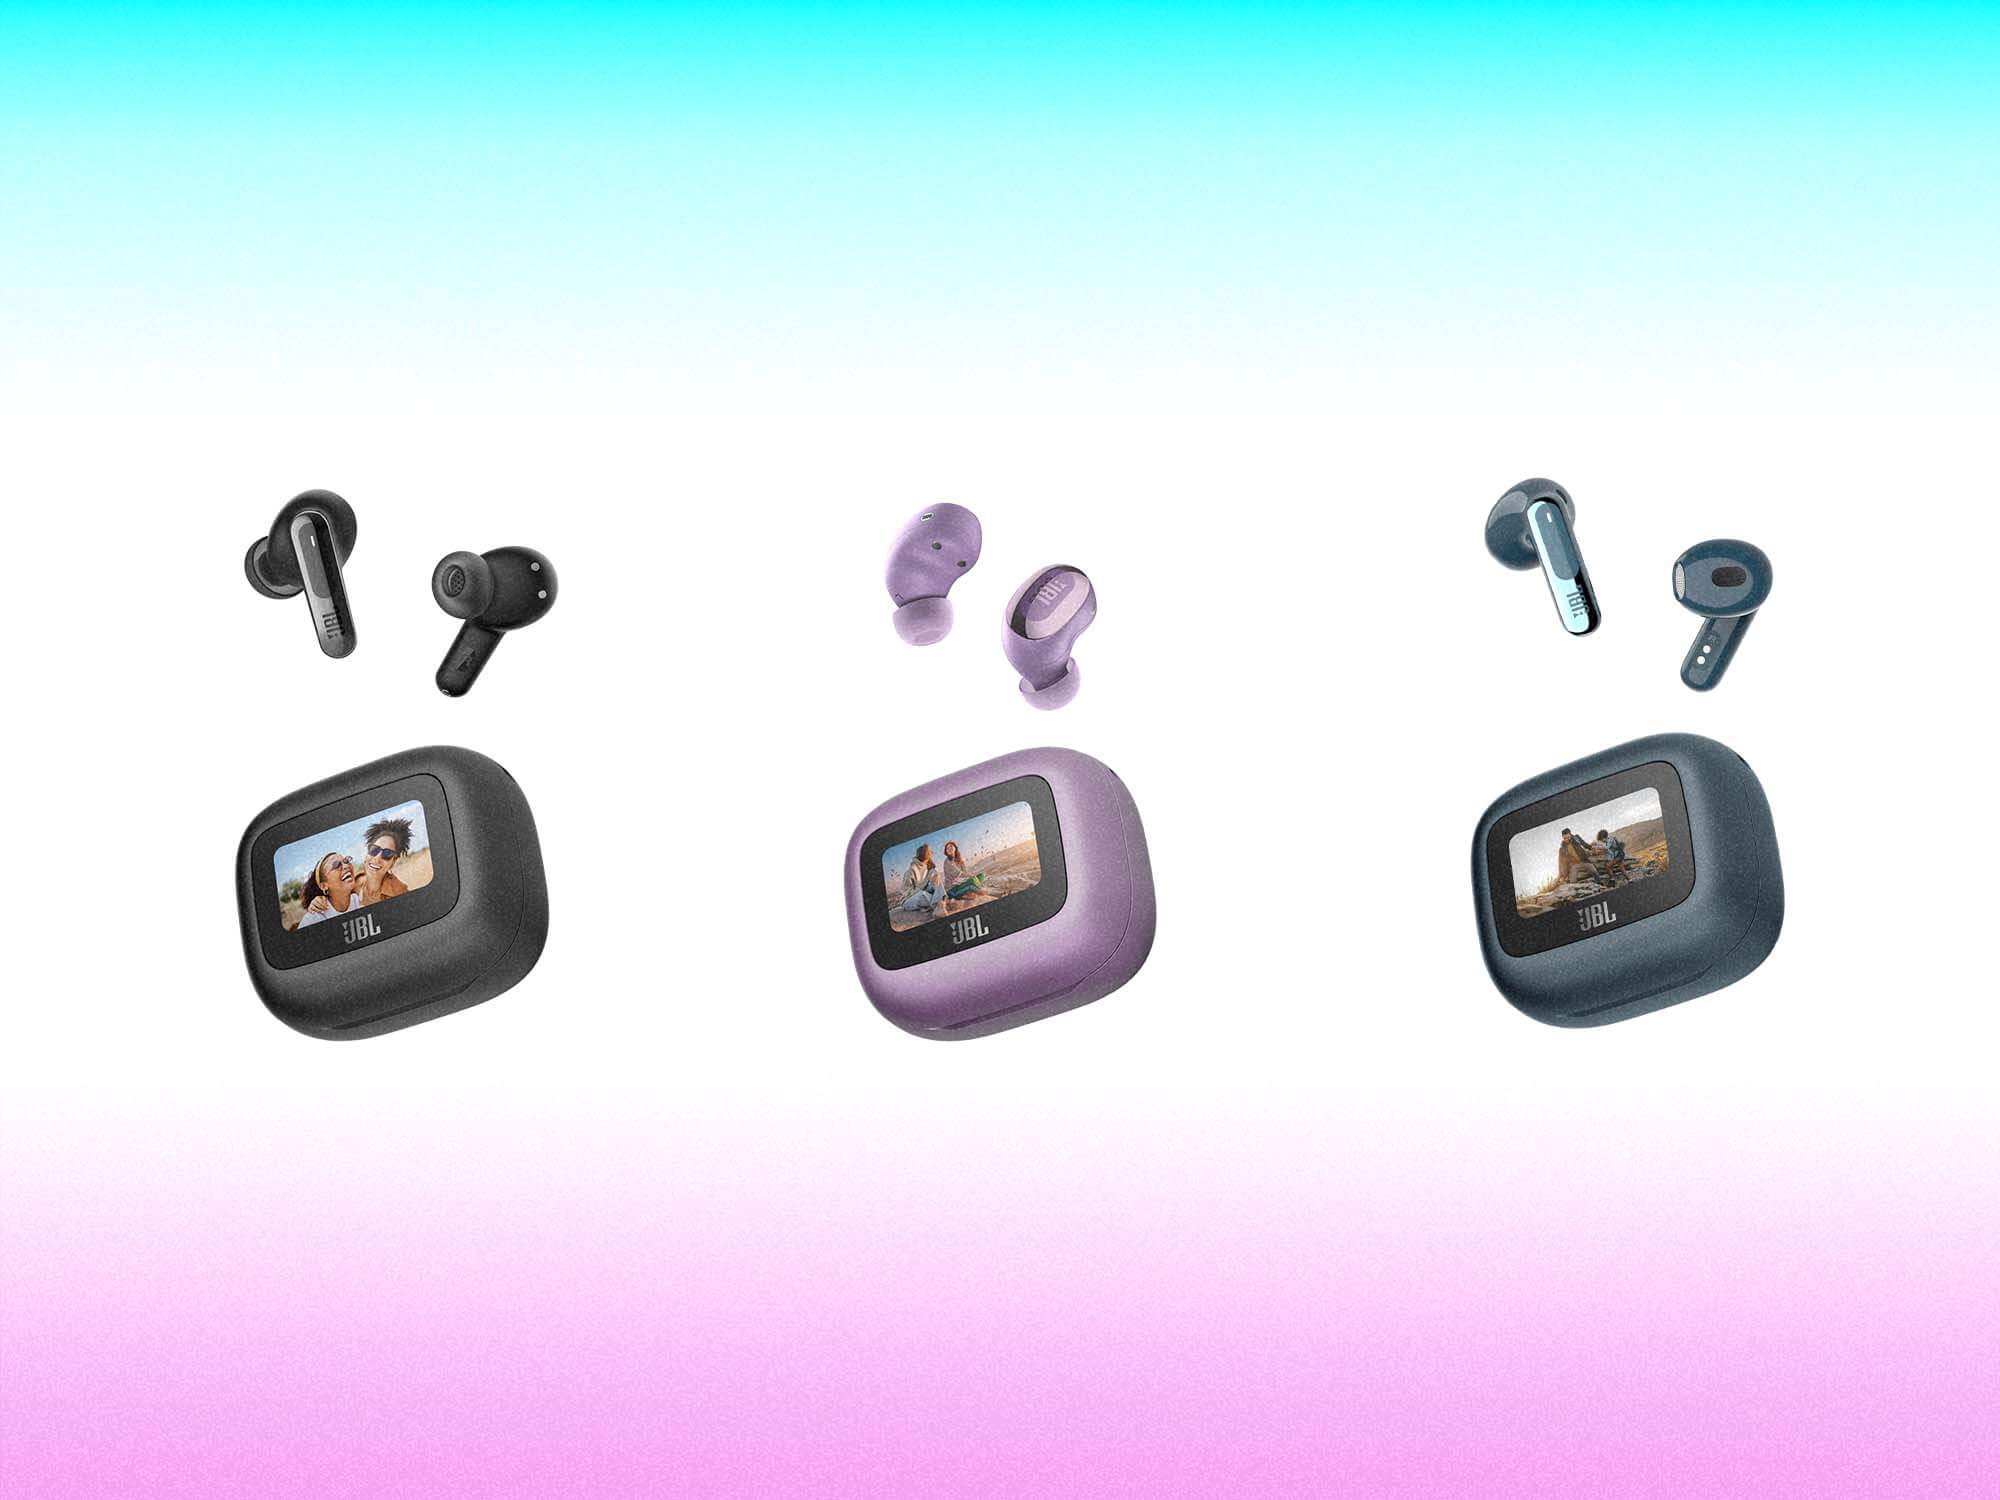 JBL's TWS 3 Series earphones in black, purple and blue. Each pair also shows a small case with a screen on it.